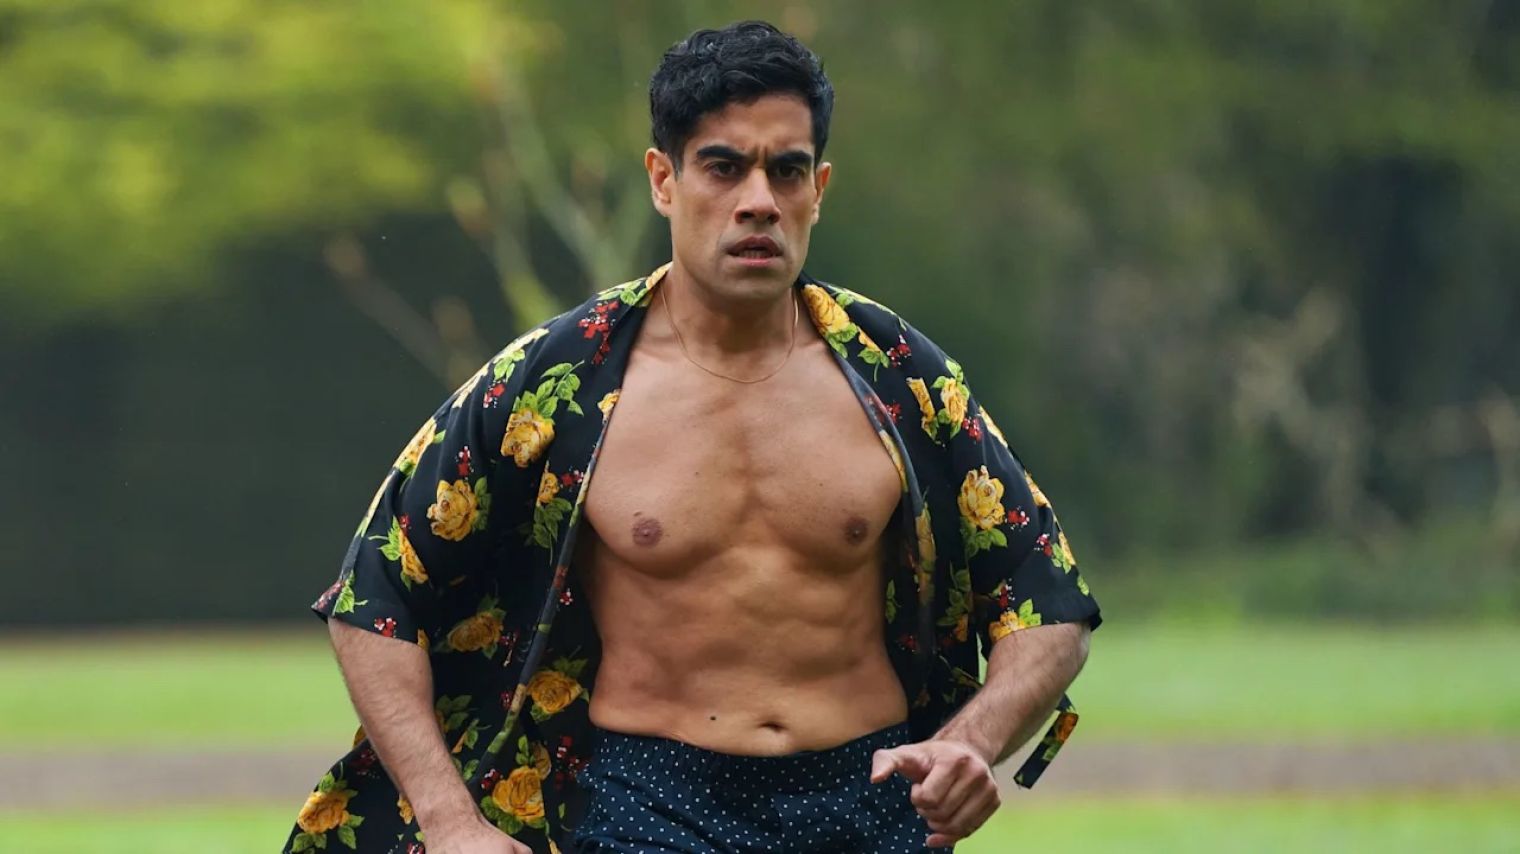 Sacha Dhawan stars as D.I. Honey in 'Wolf' which premieres on BBC One tonight at 9pm